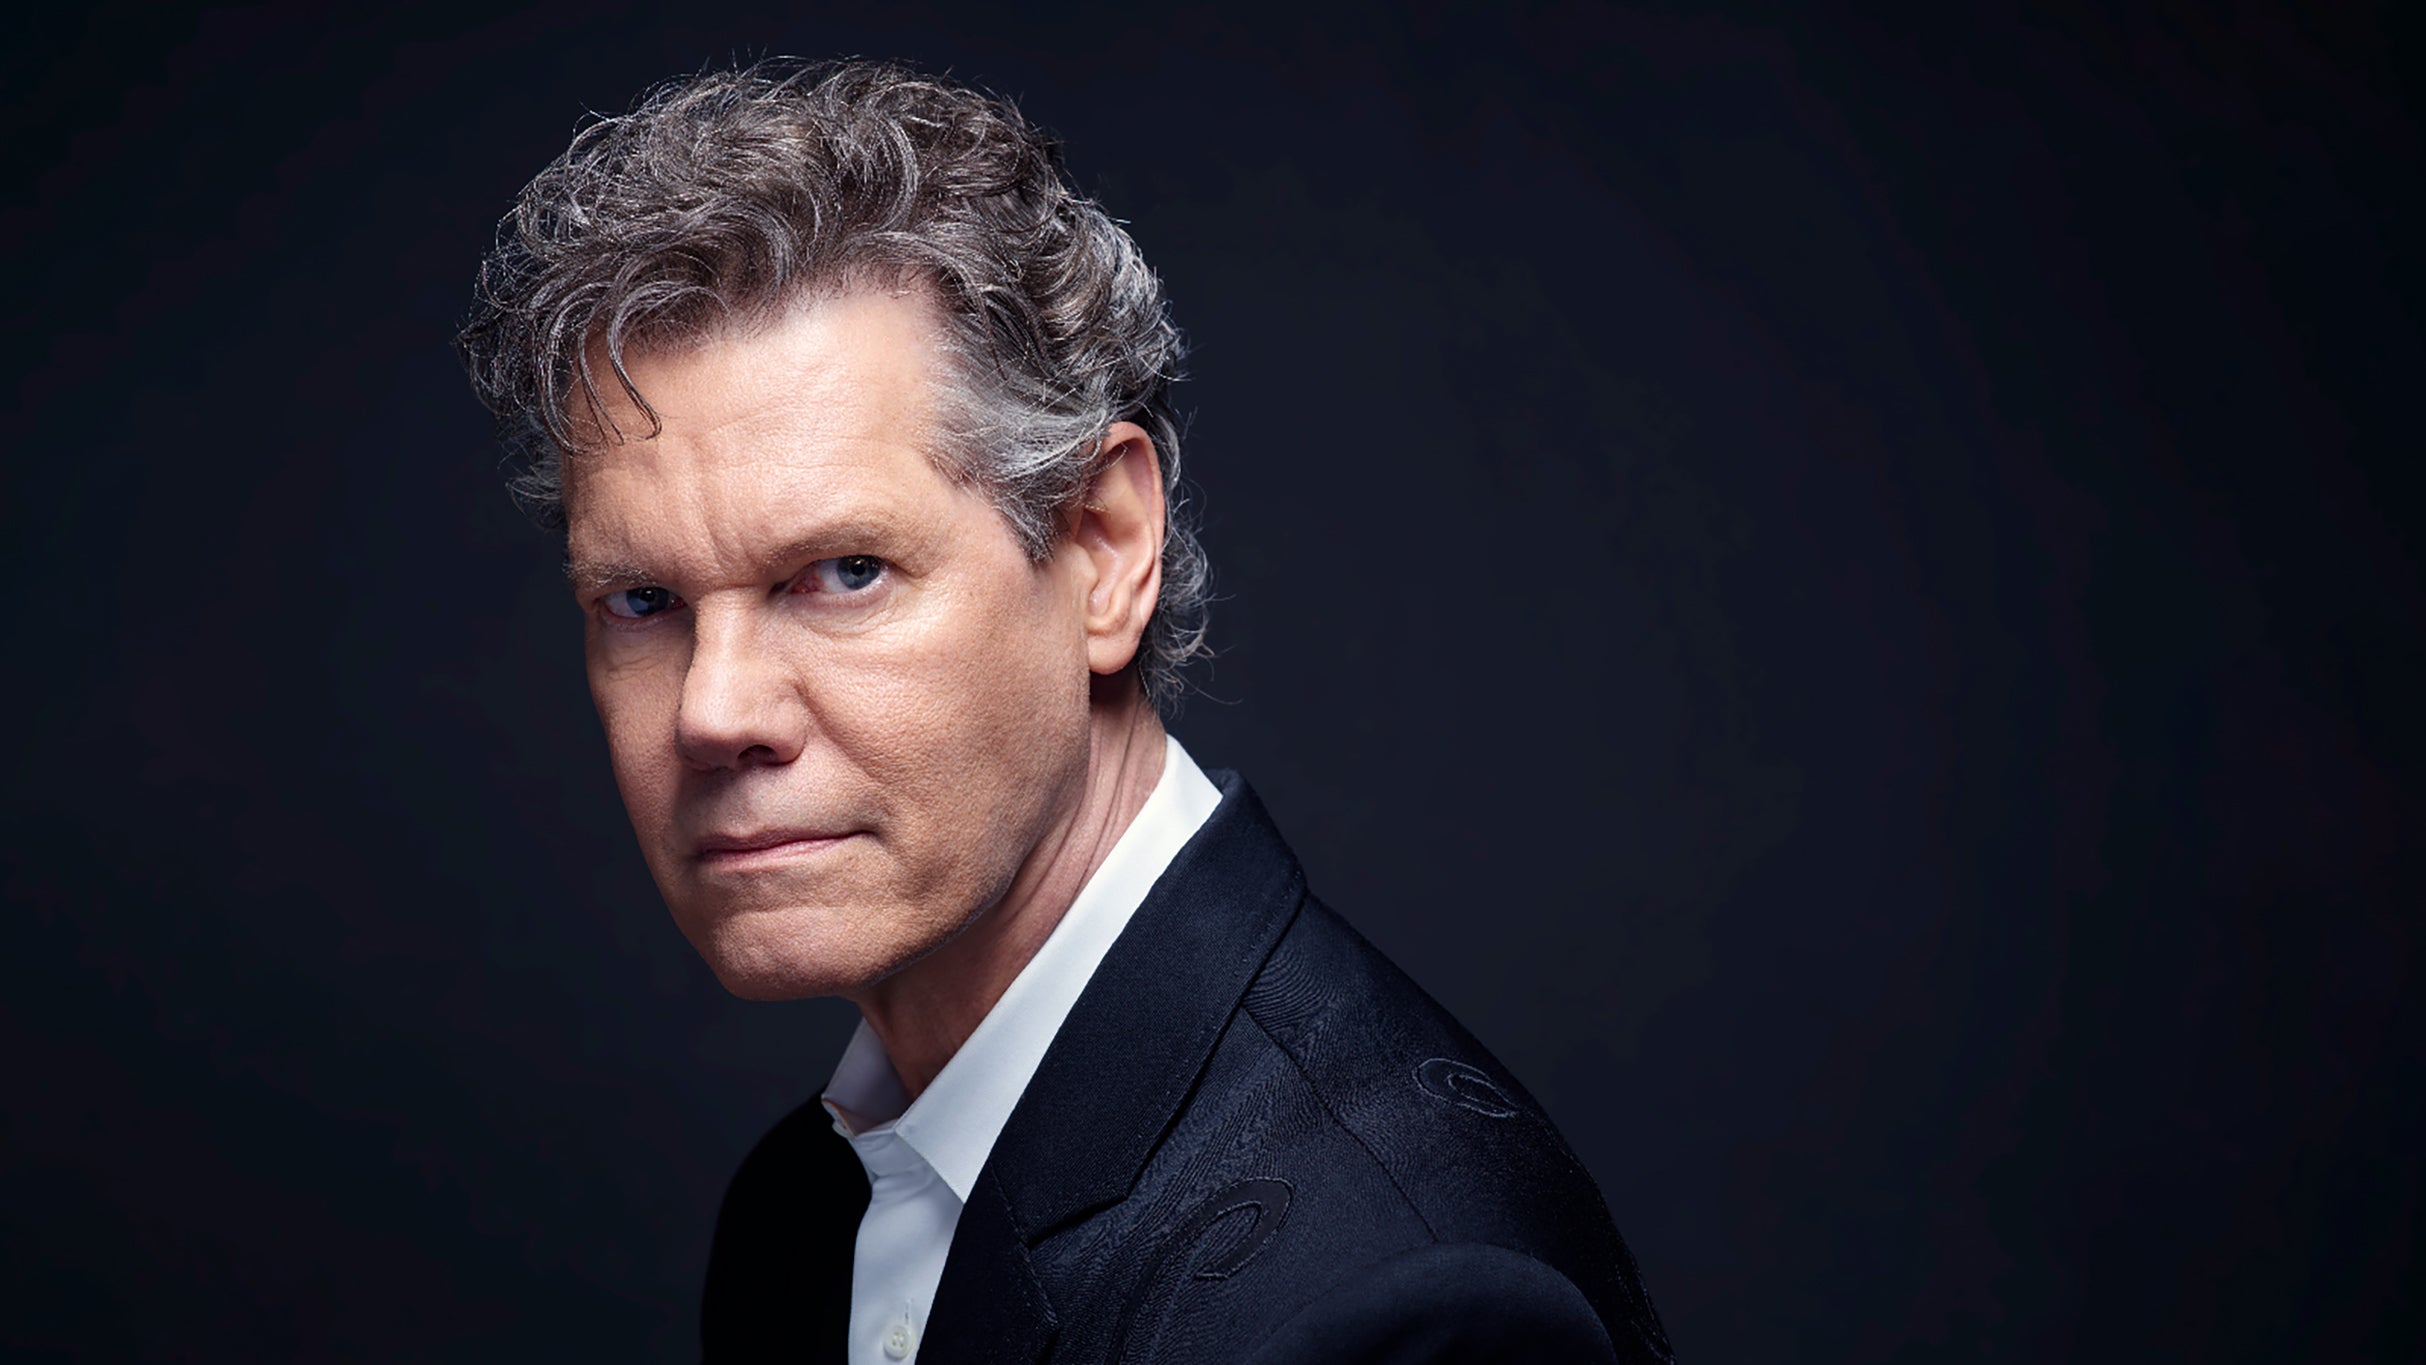 Randy Travis - More To Life Tour in Montgomery promo photo for Exclusive presale offer code